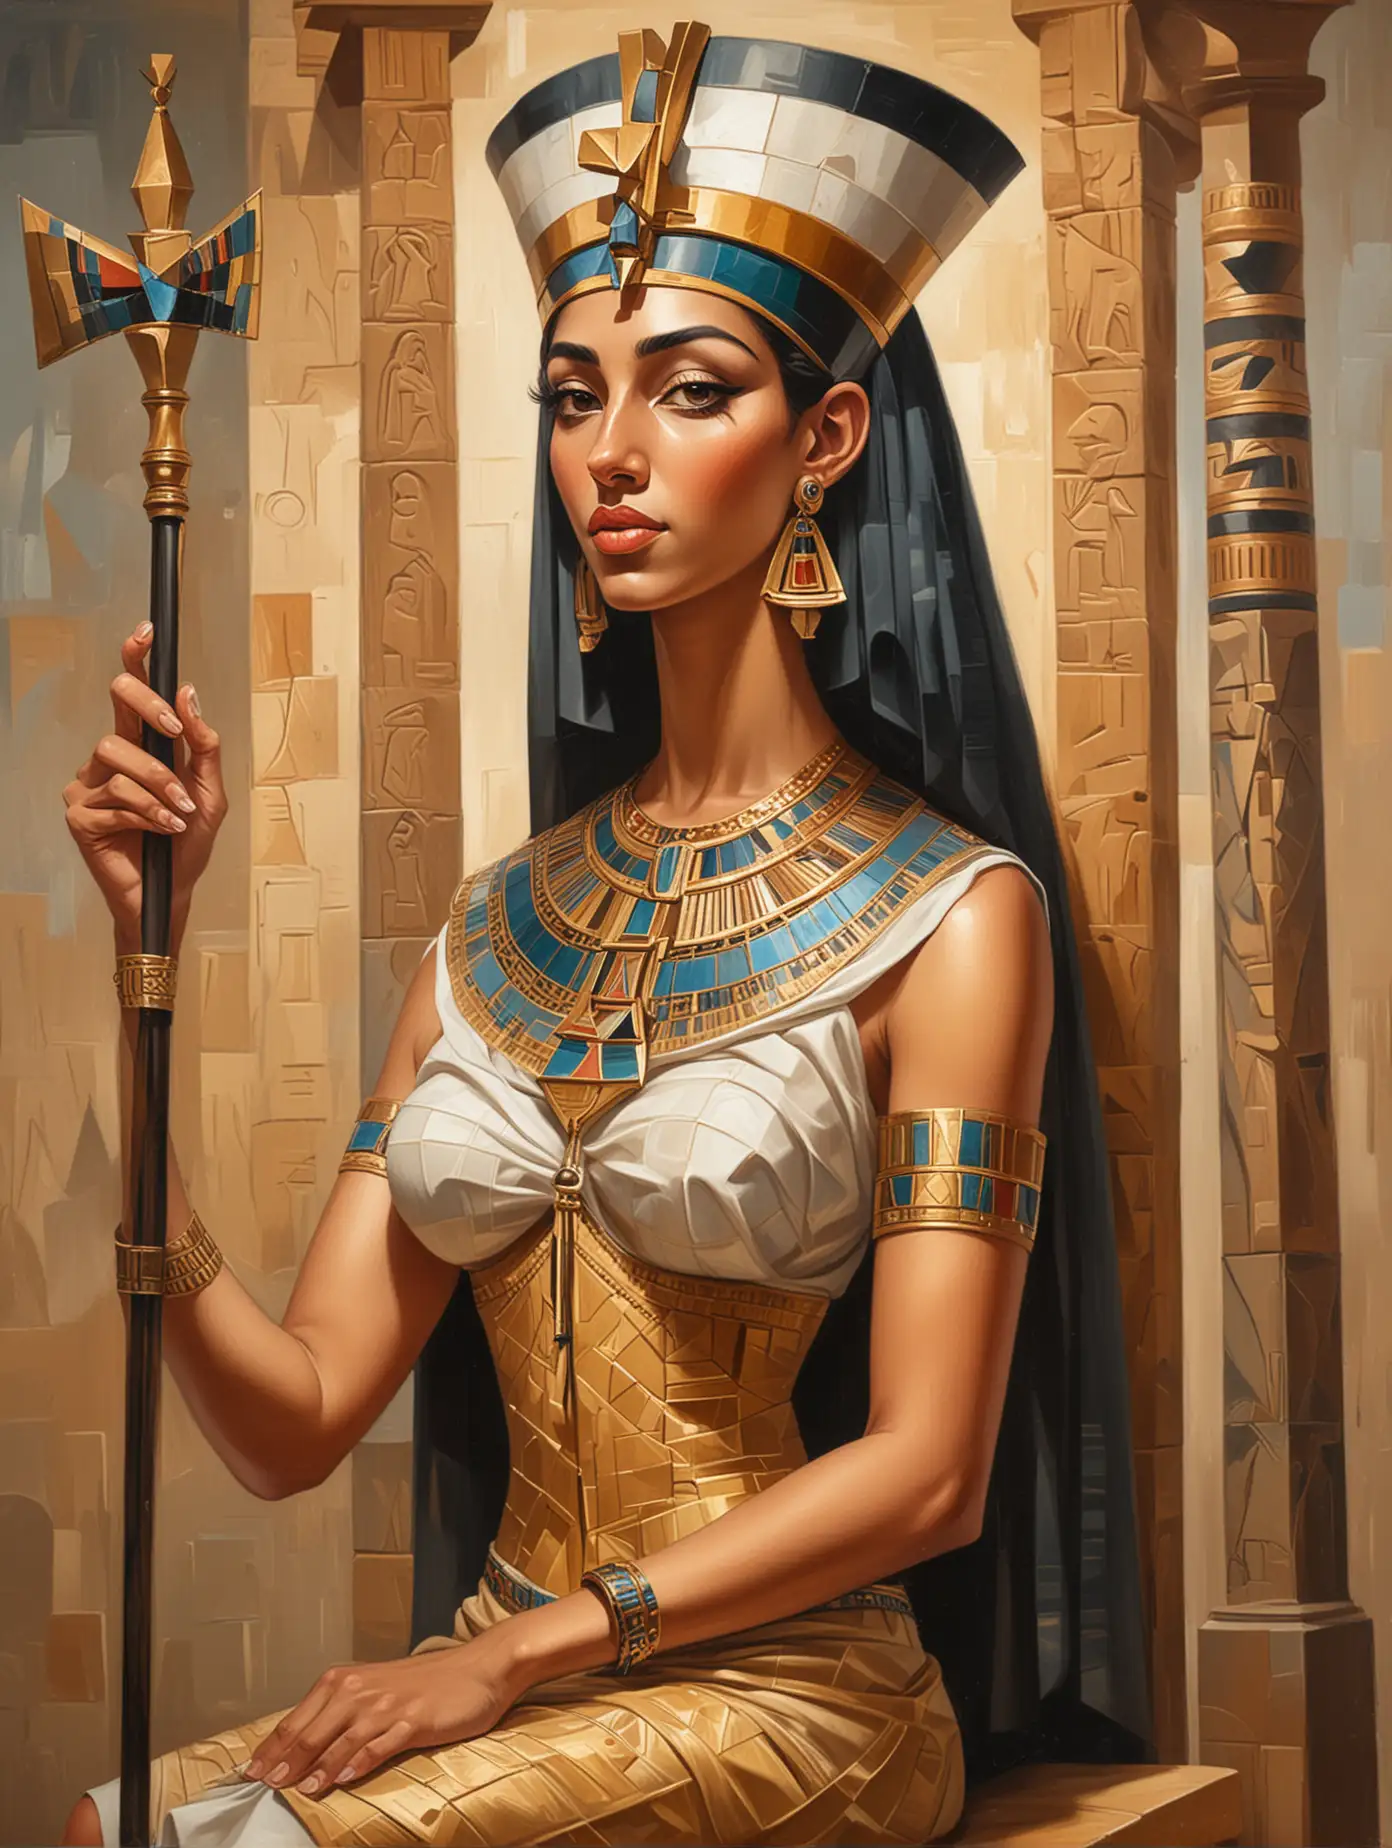 a cubist style oil painting of Cleapatra, queen of Egypt, with her majestic cloth sitting on throne of egypt and holding the sticks of Feroh of Egypt